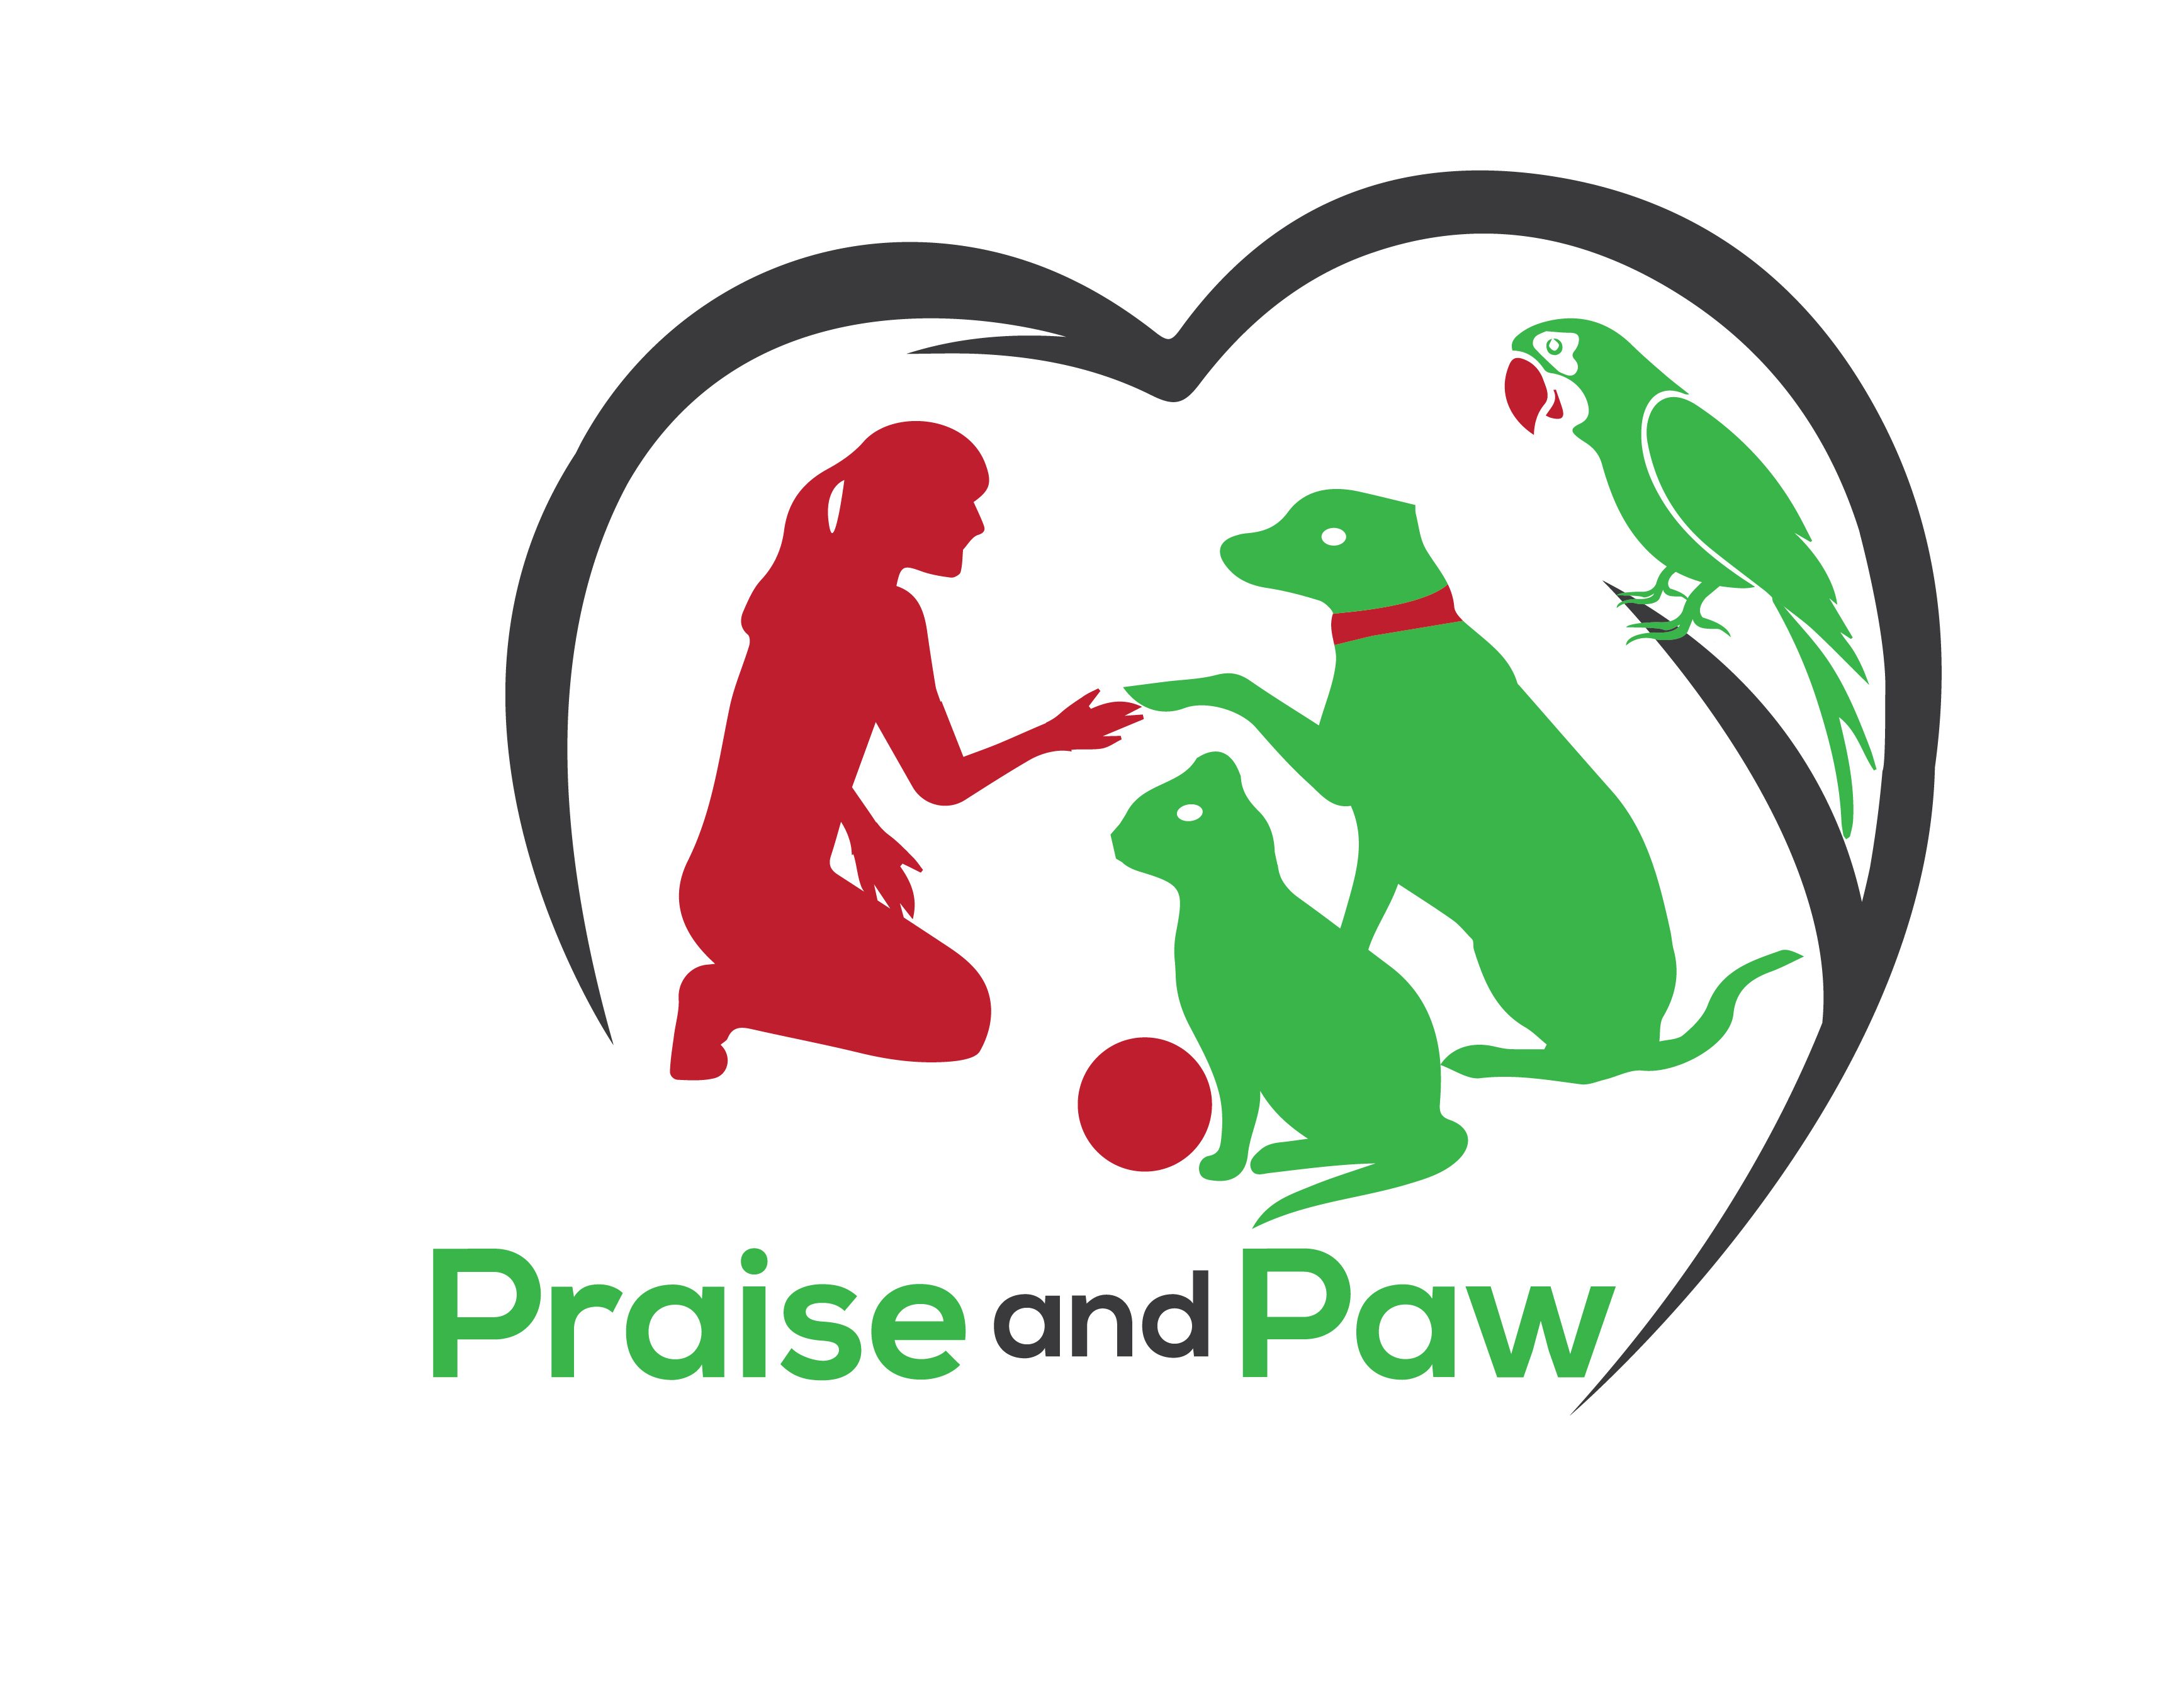 Praise and Paw